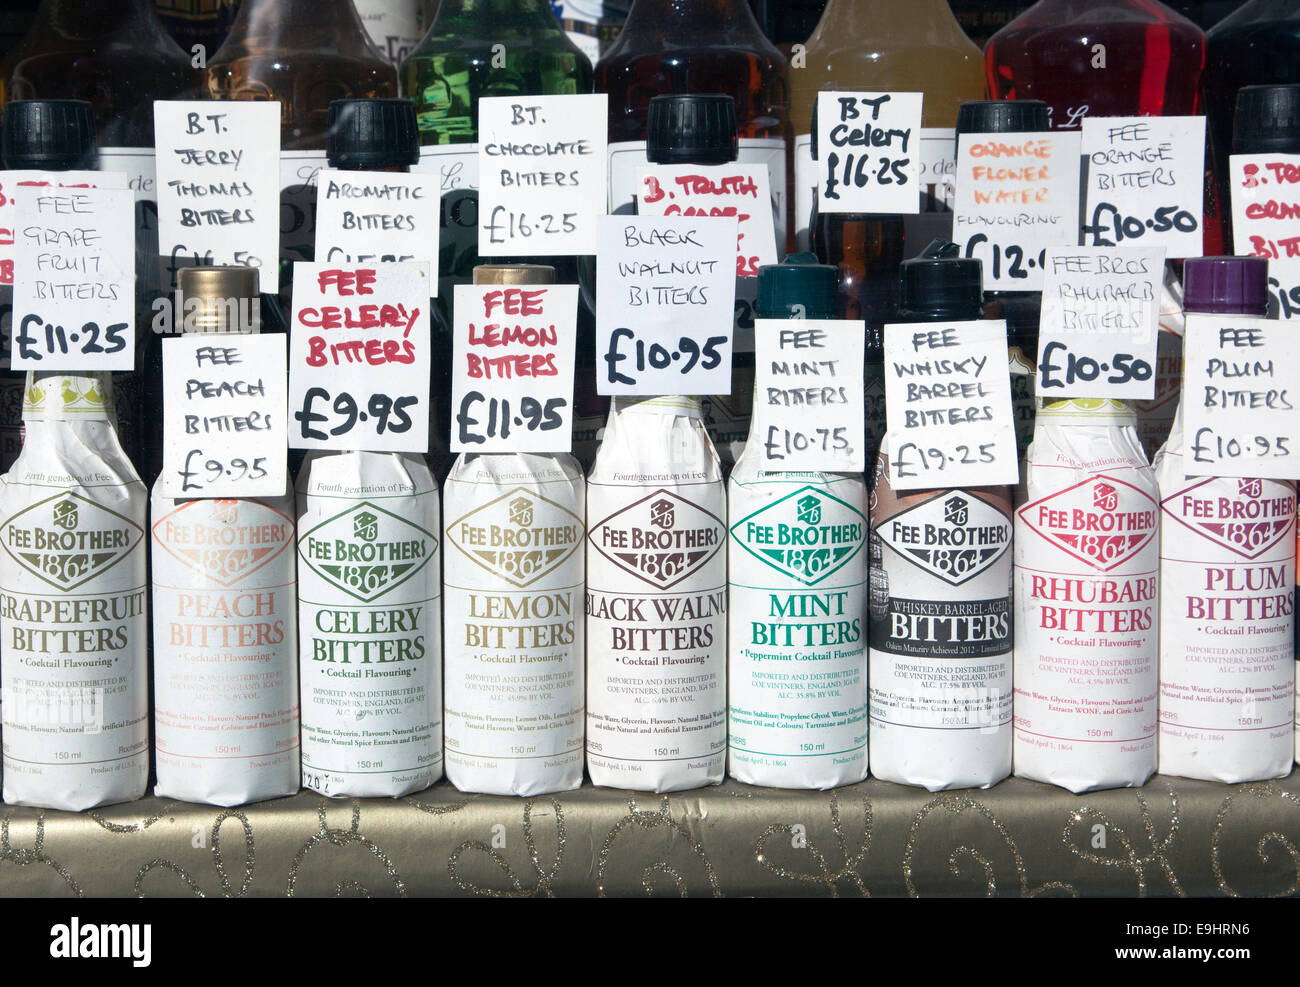 Different flavours of Fee Brothers bitters in London shop window Stock Photo